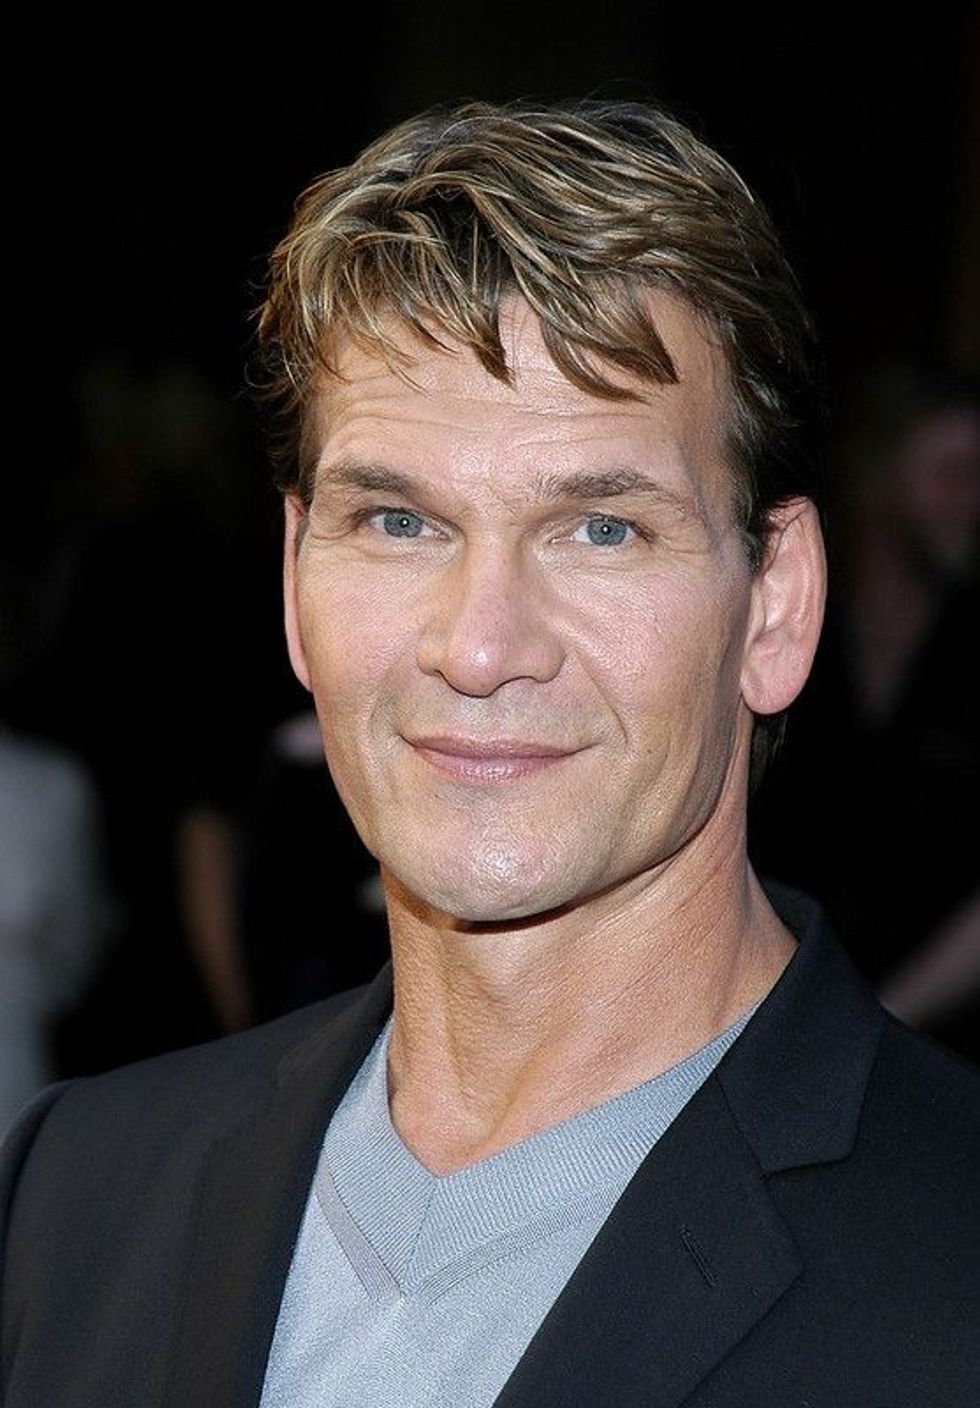 Read the best Patrick Swayze quotes in this article.